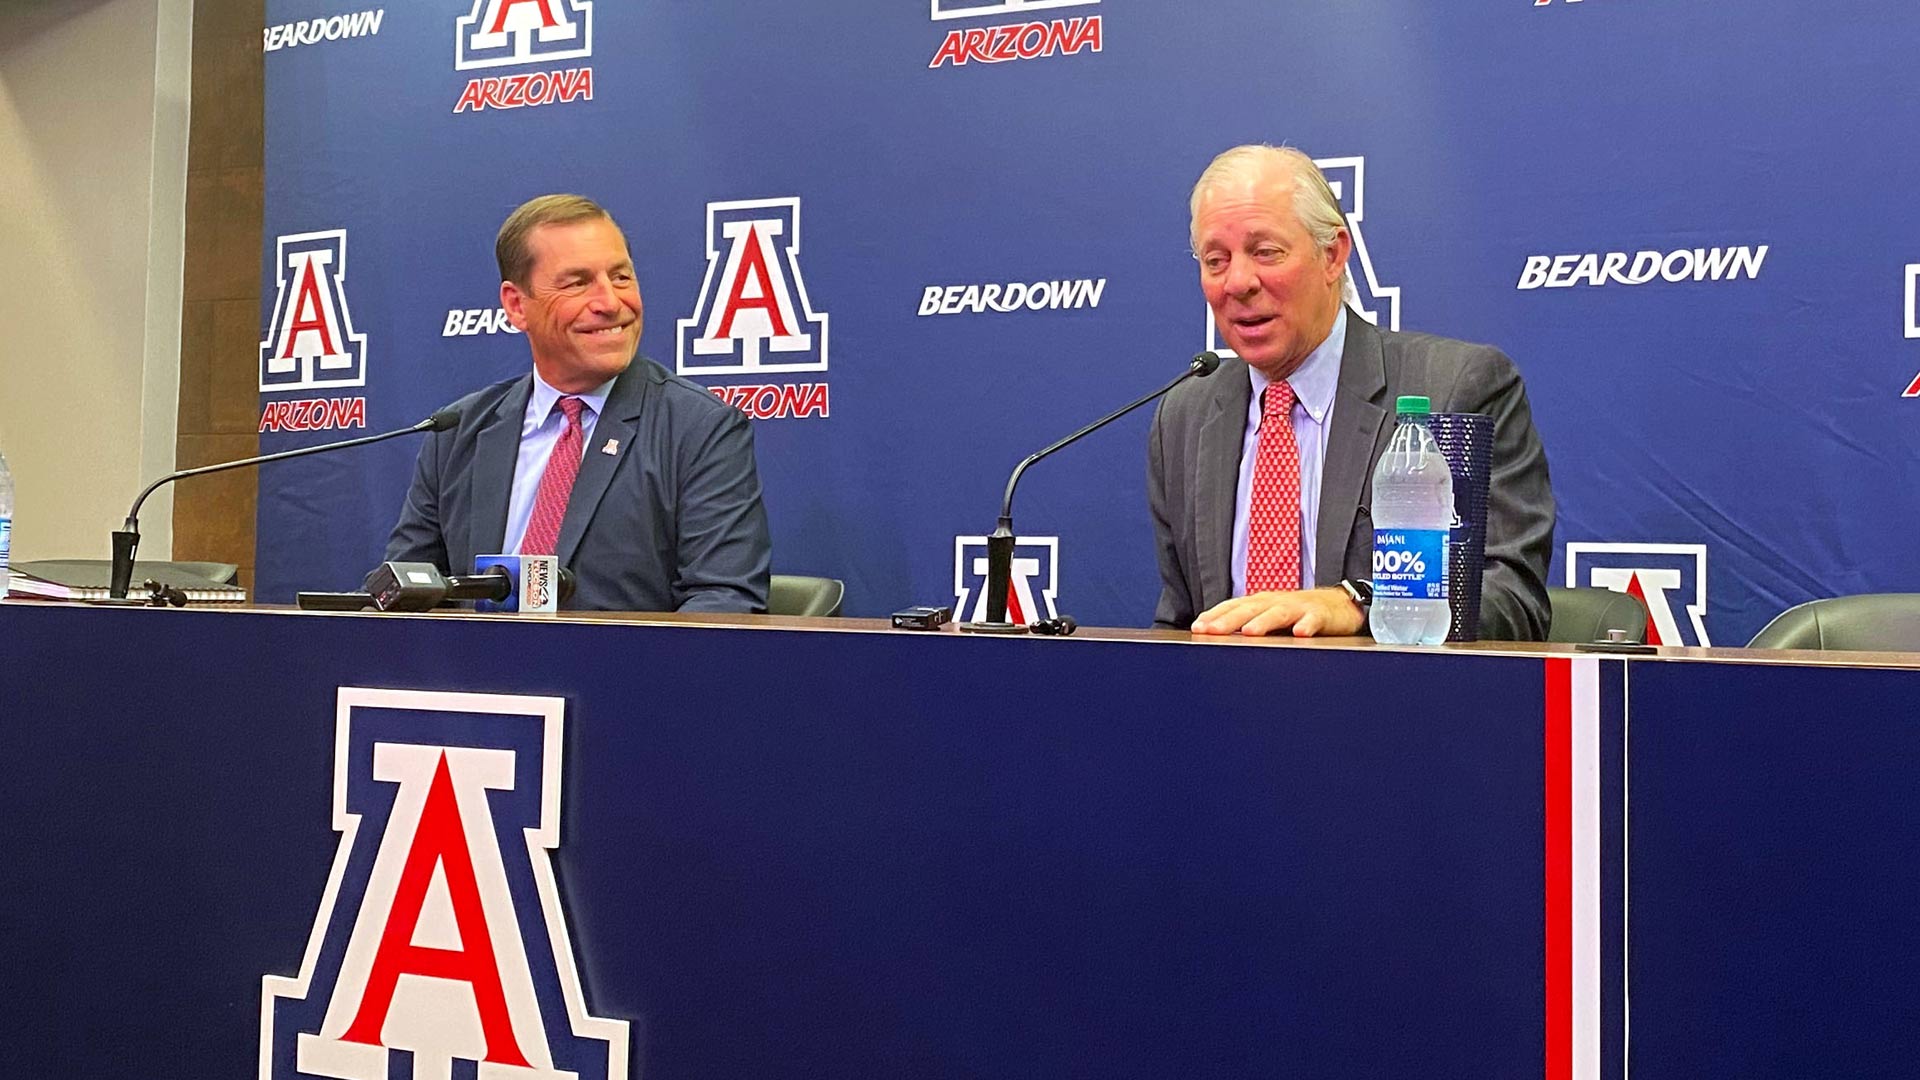 The University of Arizona Athletic Director Dave Heeke and President Robert C. Robbins, talk about UA joining the Big 12 Conference on Monday, Aug. 7 at Arizona Stadium in Tucson, Ariz. The press conference follows the announcement made Friday, that the UA was leaving the Pac-12 Conference, after nearly five decades. 